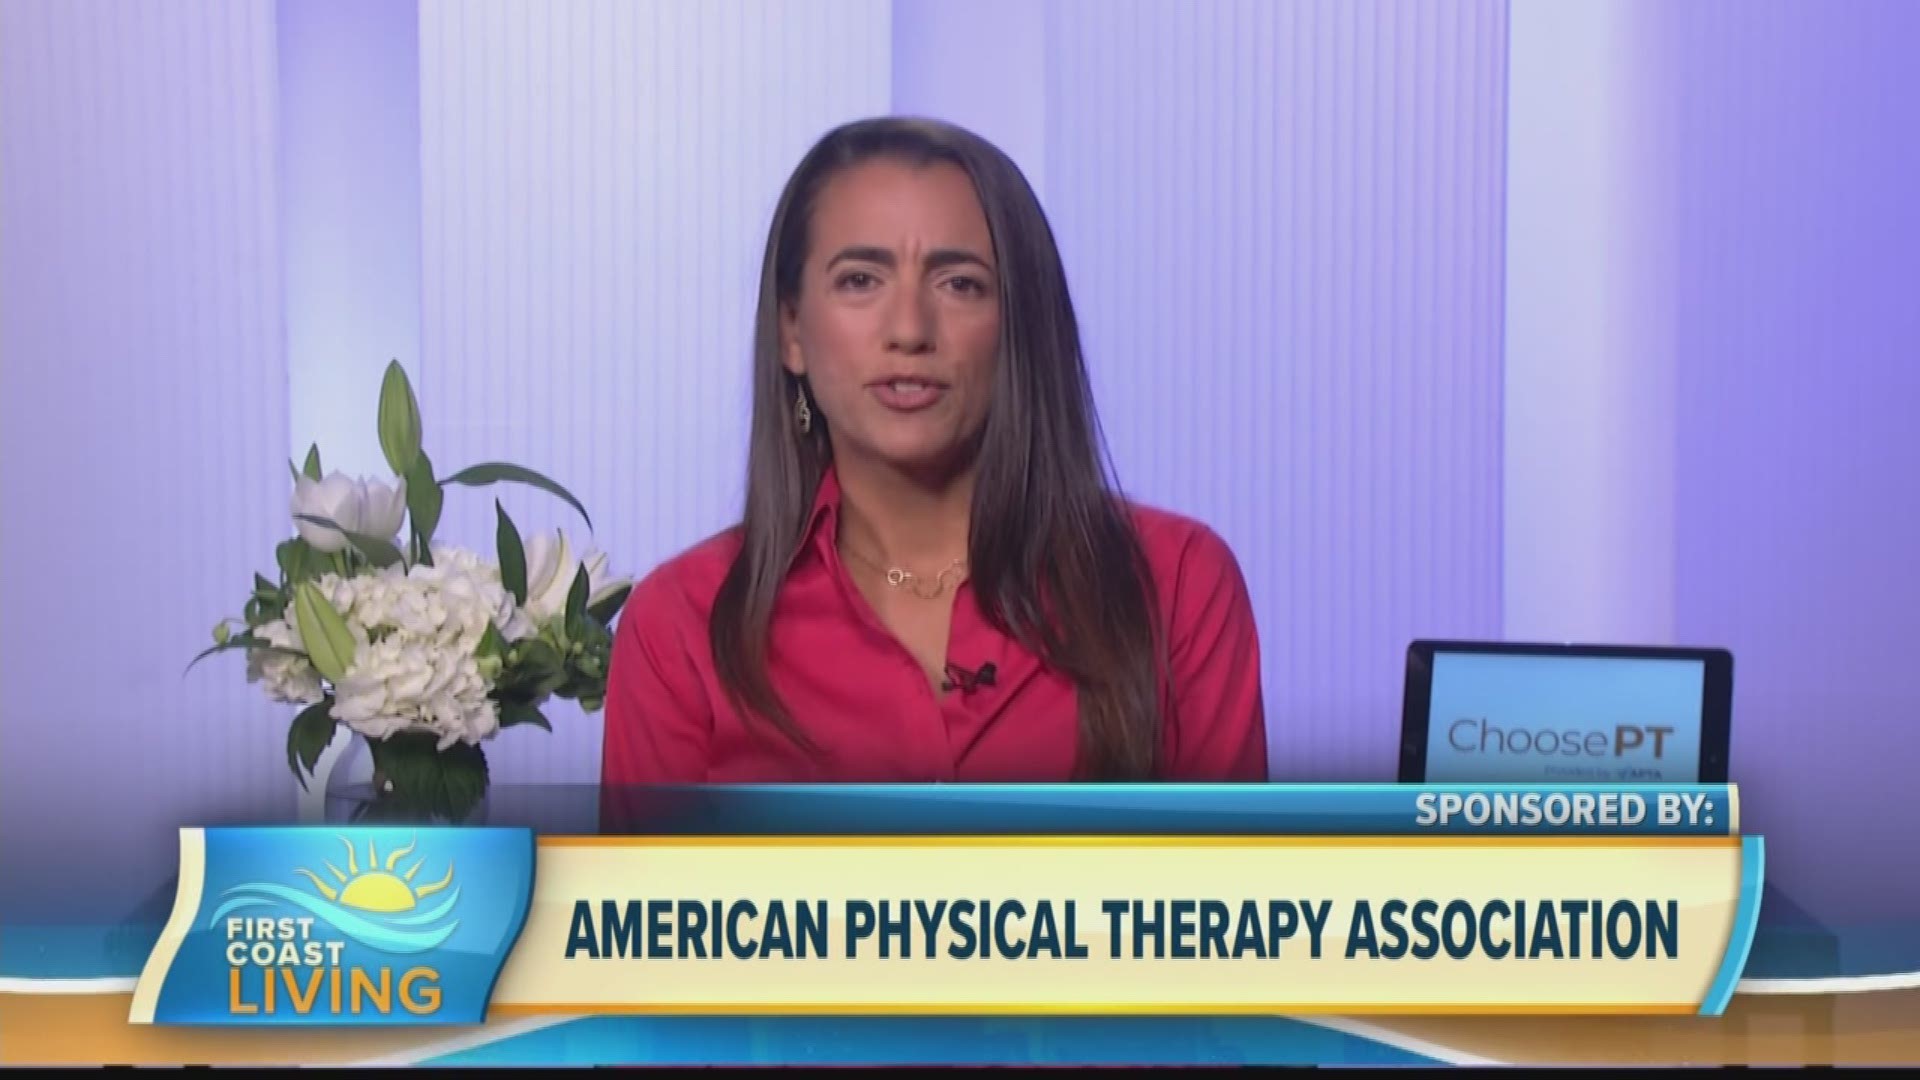 Learn more about how Physical Therapy is a better alternative than opioid use